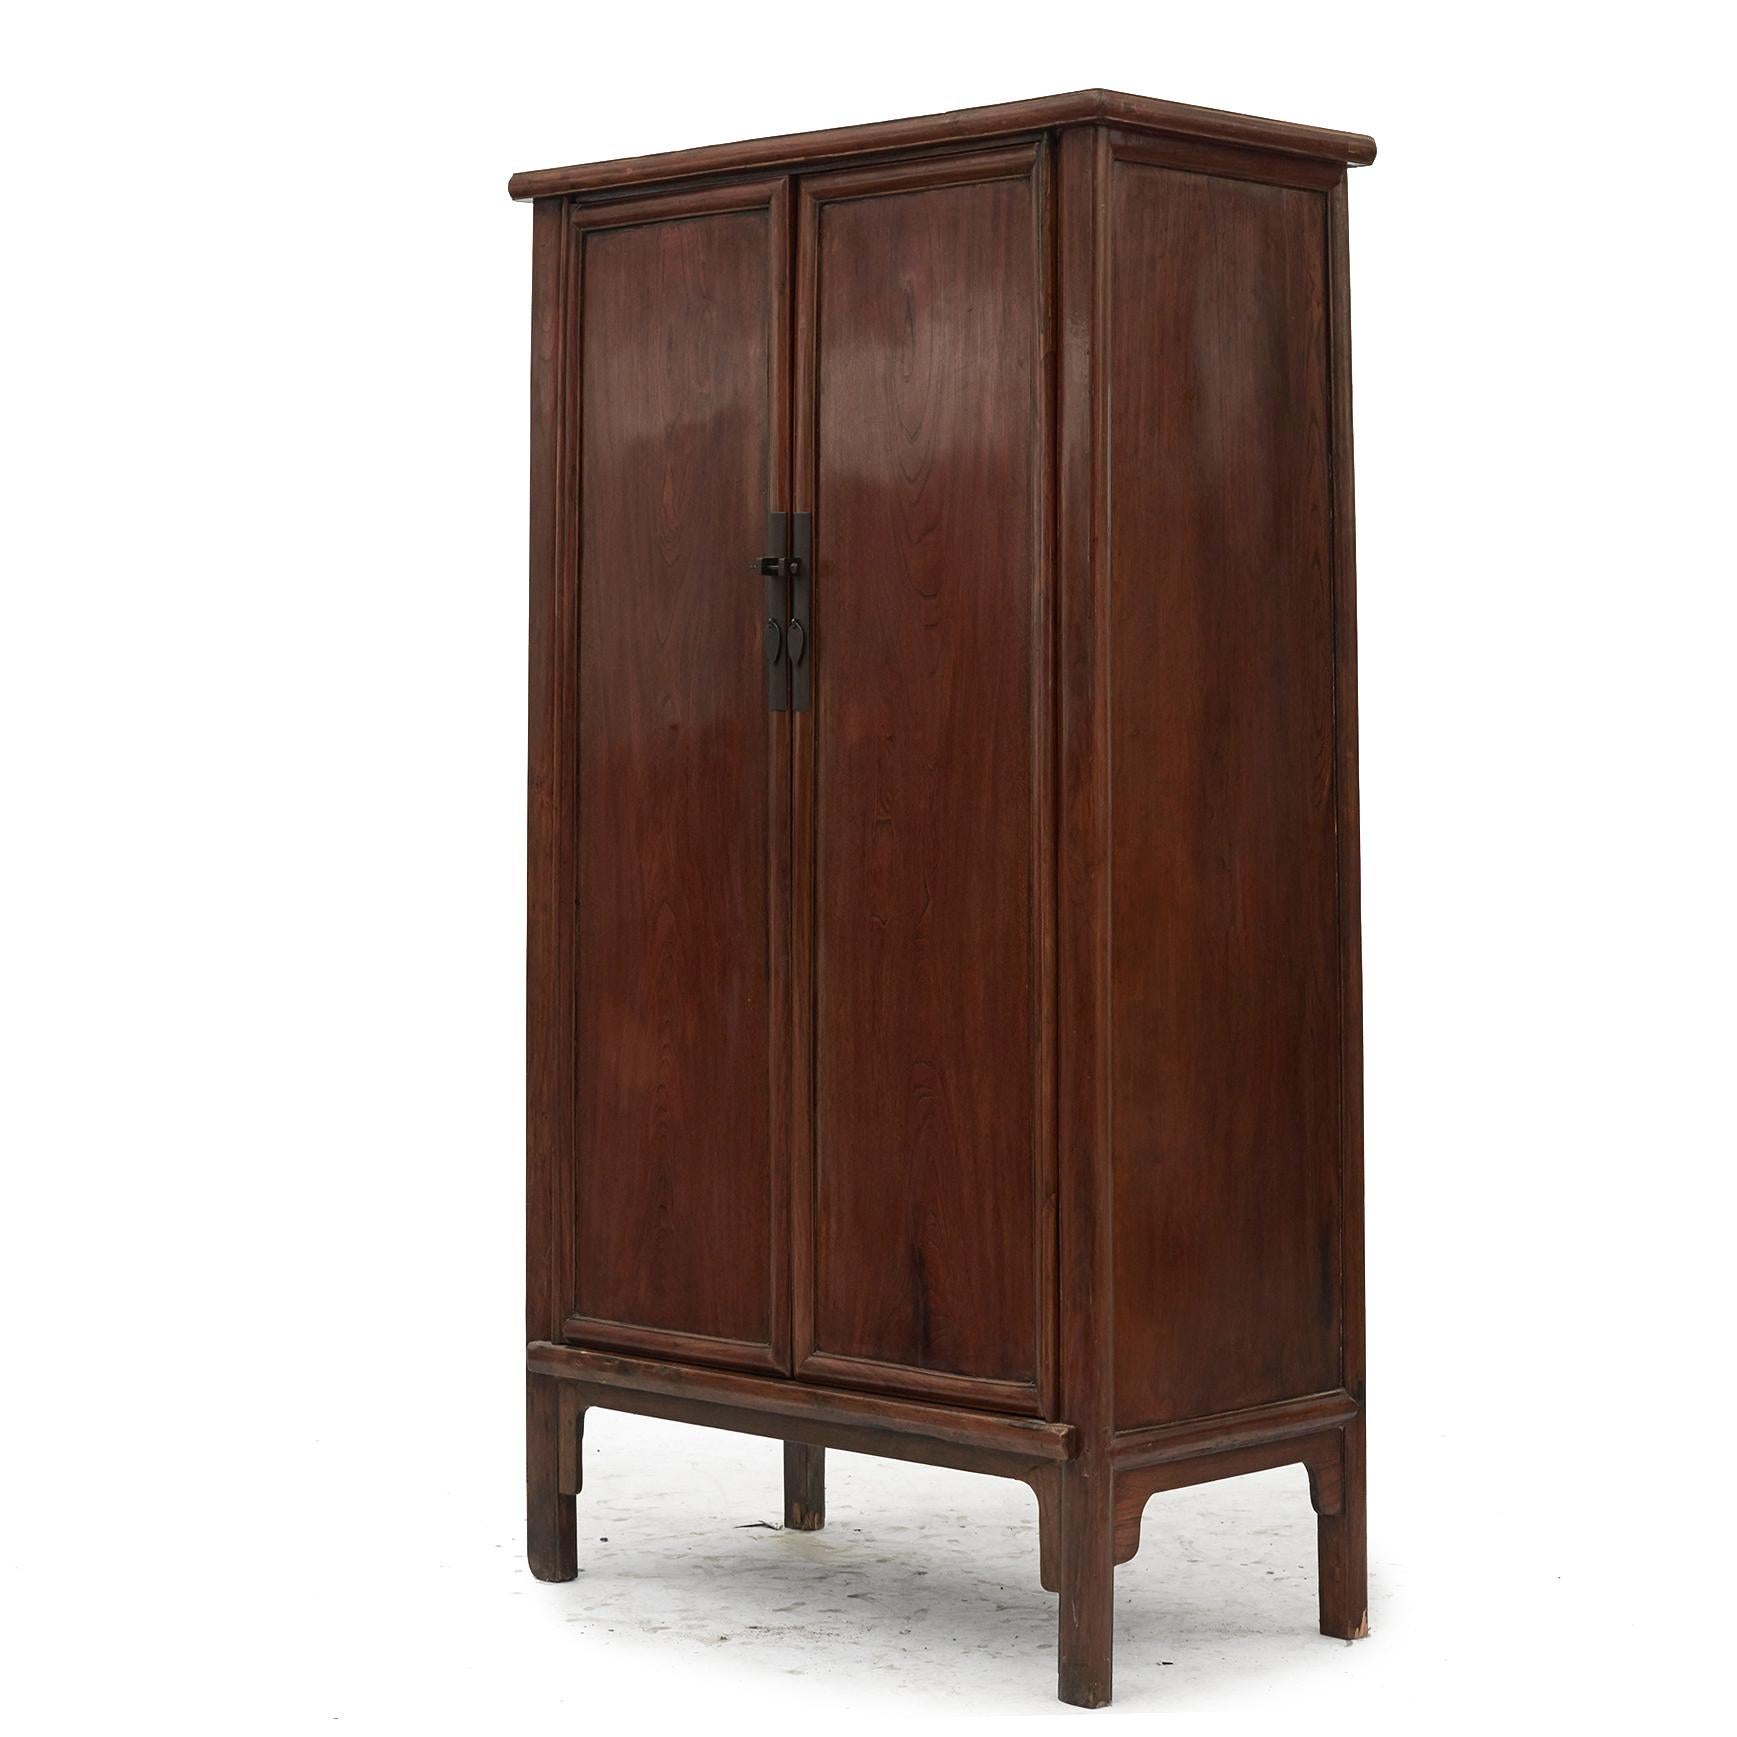 Ming style cabinet made of jumü wood (southern elm) slightly conical (typical of Ming design). Pair of doors and sides in one piece of wood, surrounded by panels with beautiful veining and profiled mouldings.
A beautiful cabinet in an very elegant